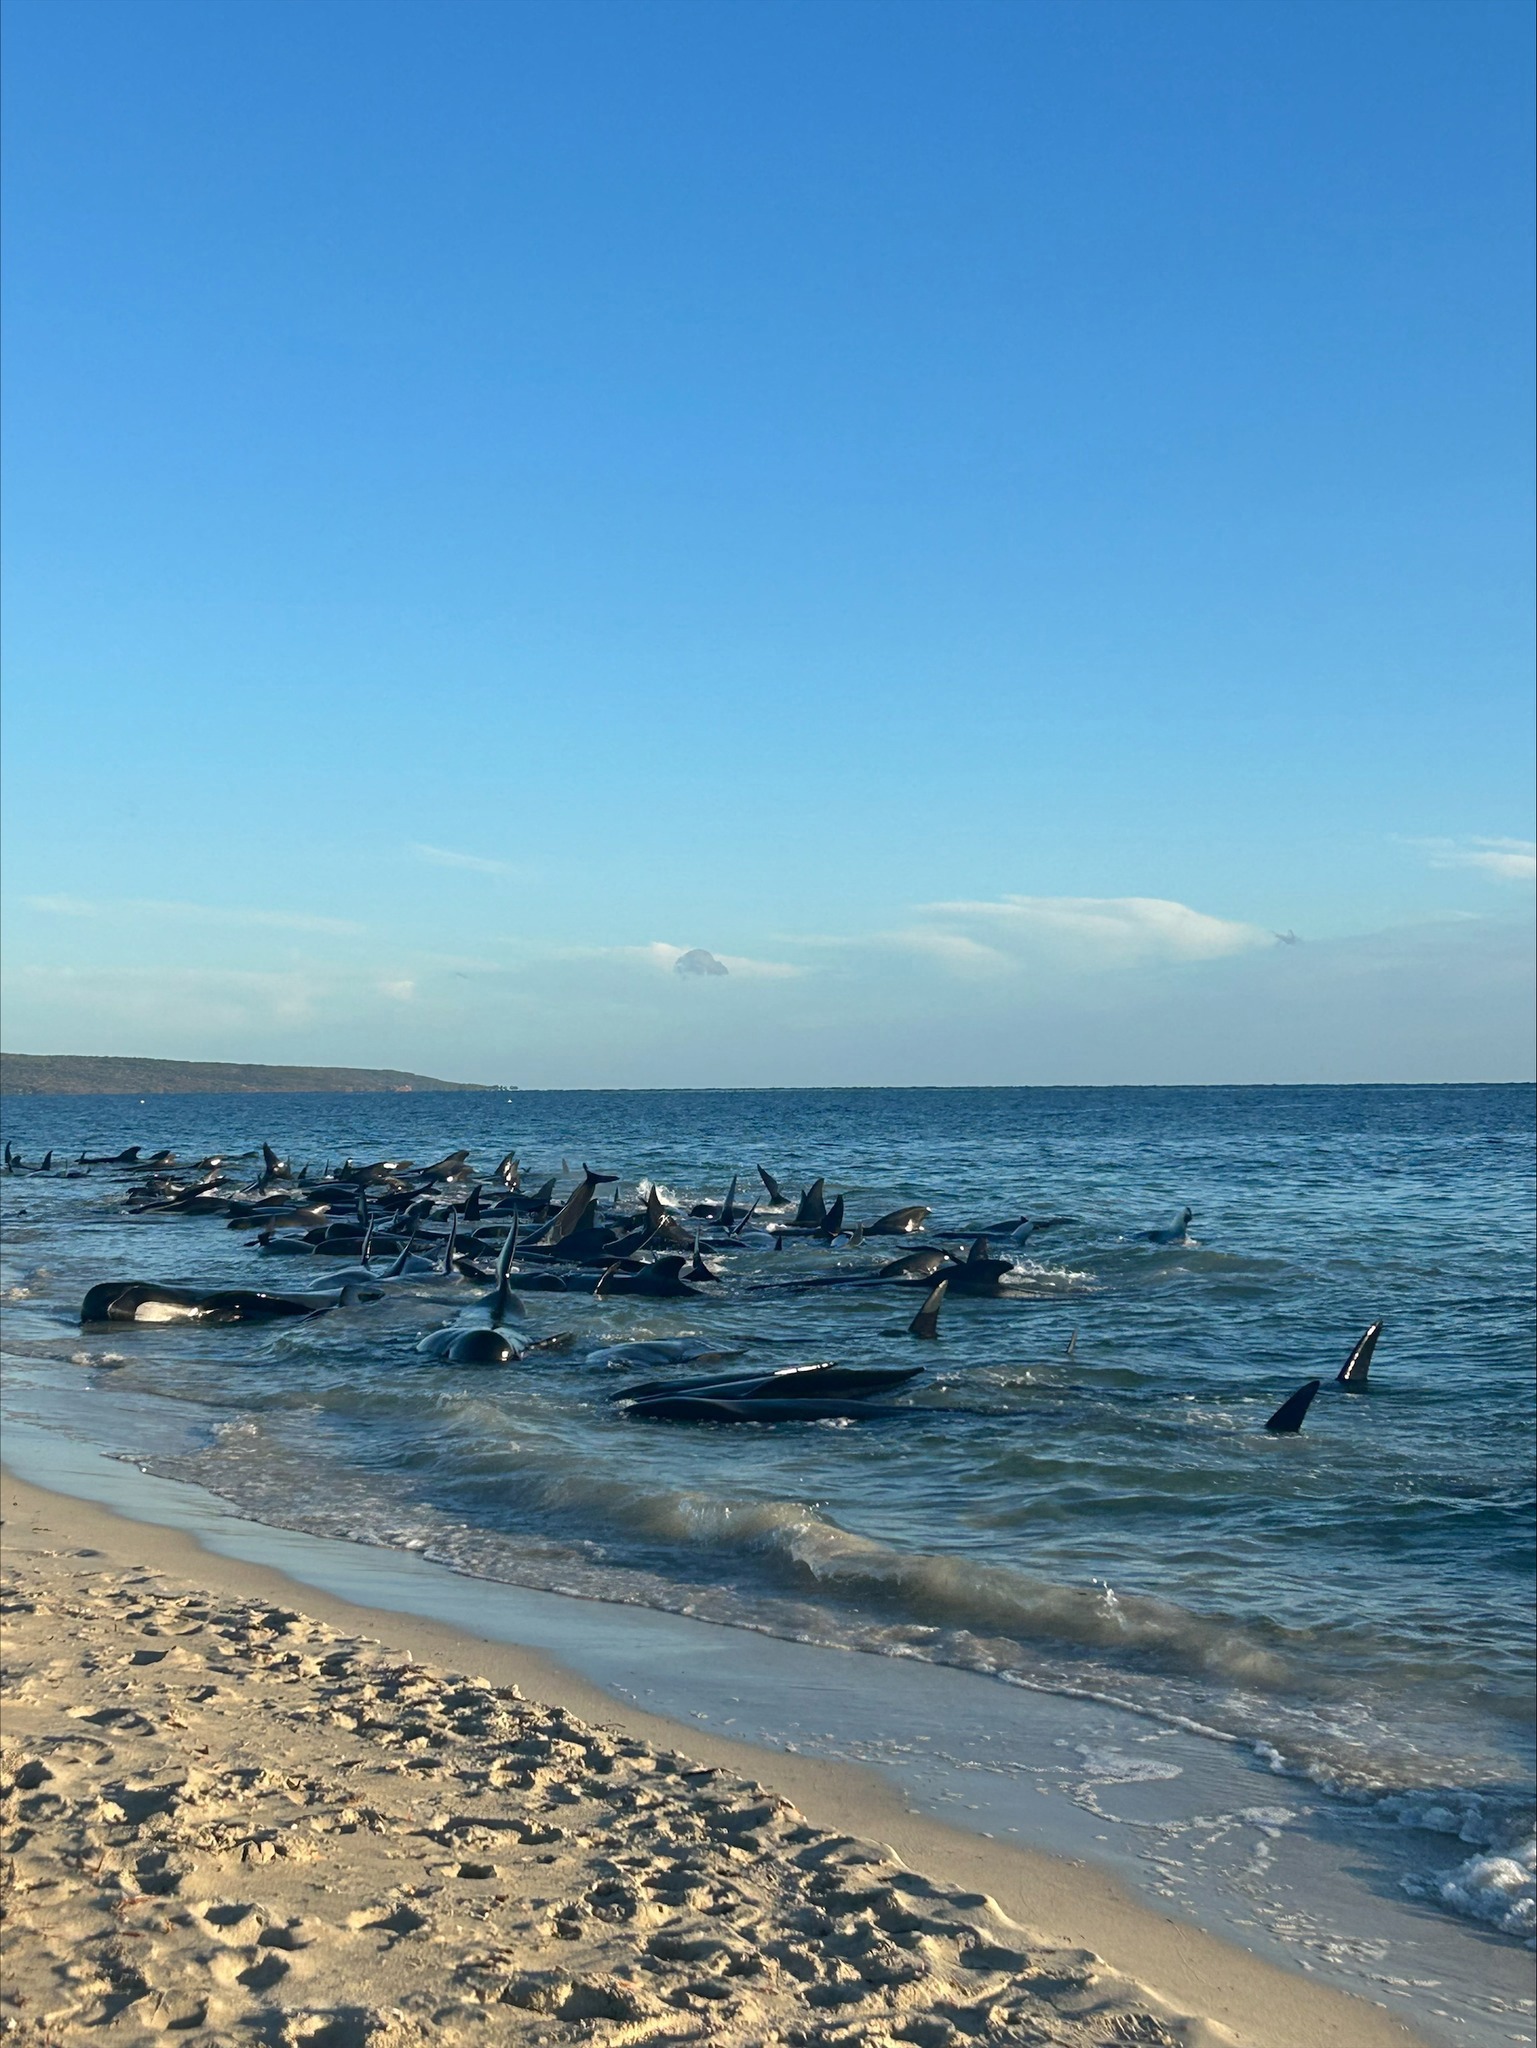 A mass pod of whales have beached themselves at ﻿Toby's Inlet near Dunsborough in Western Australia